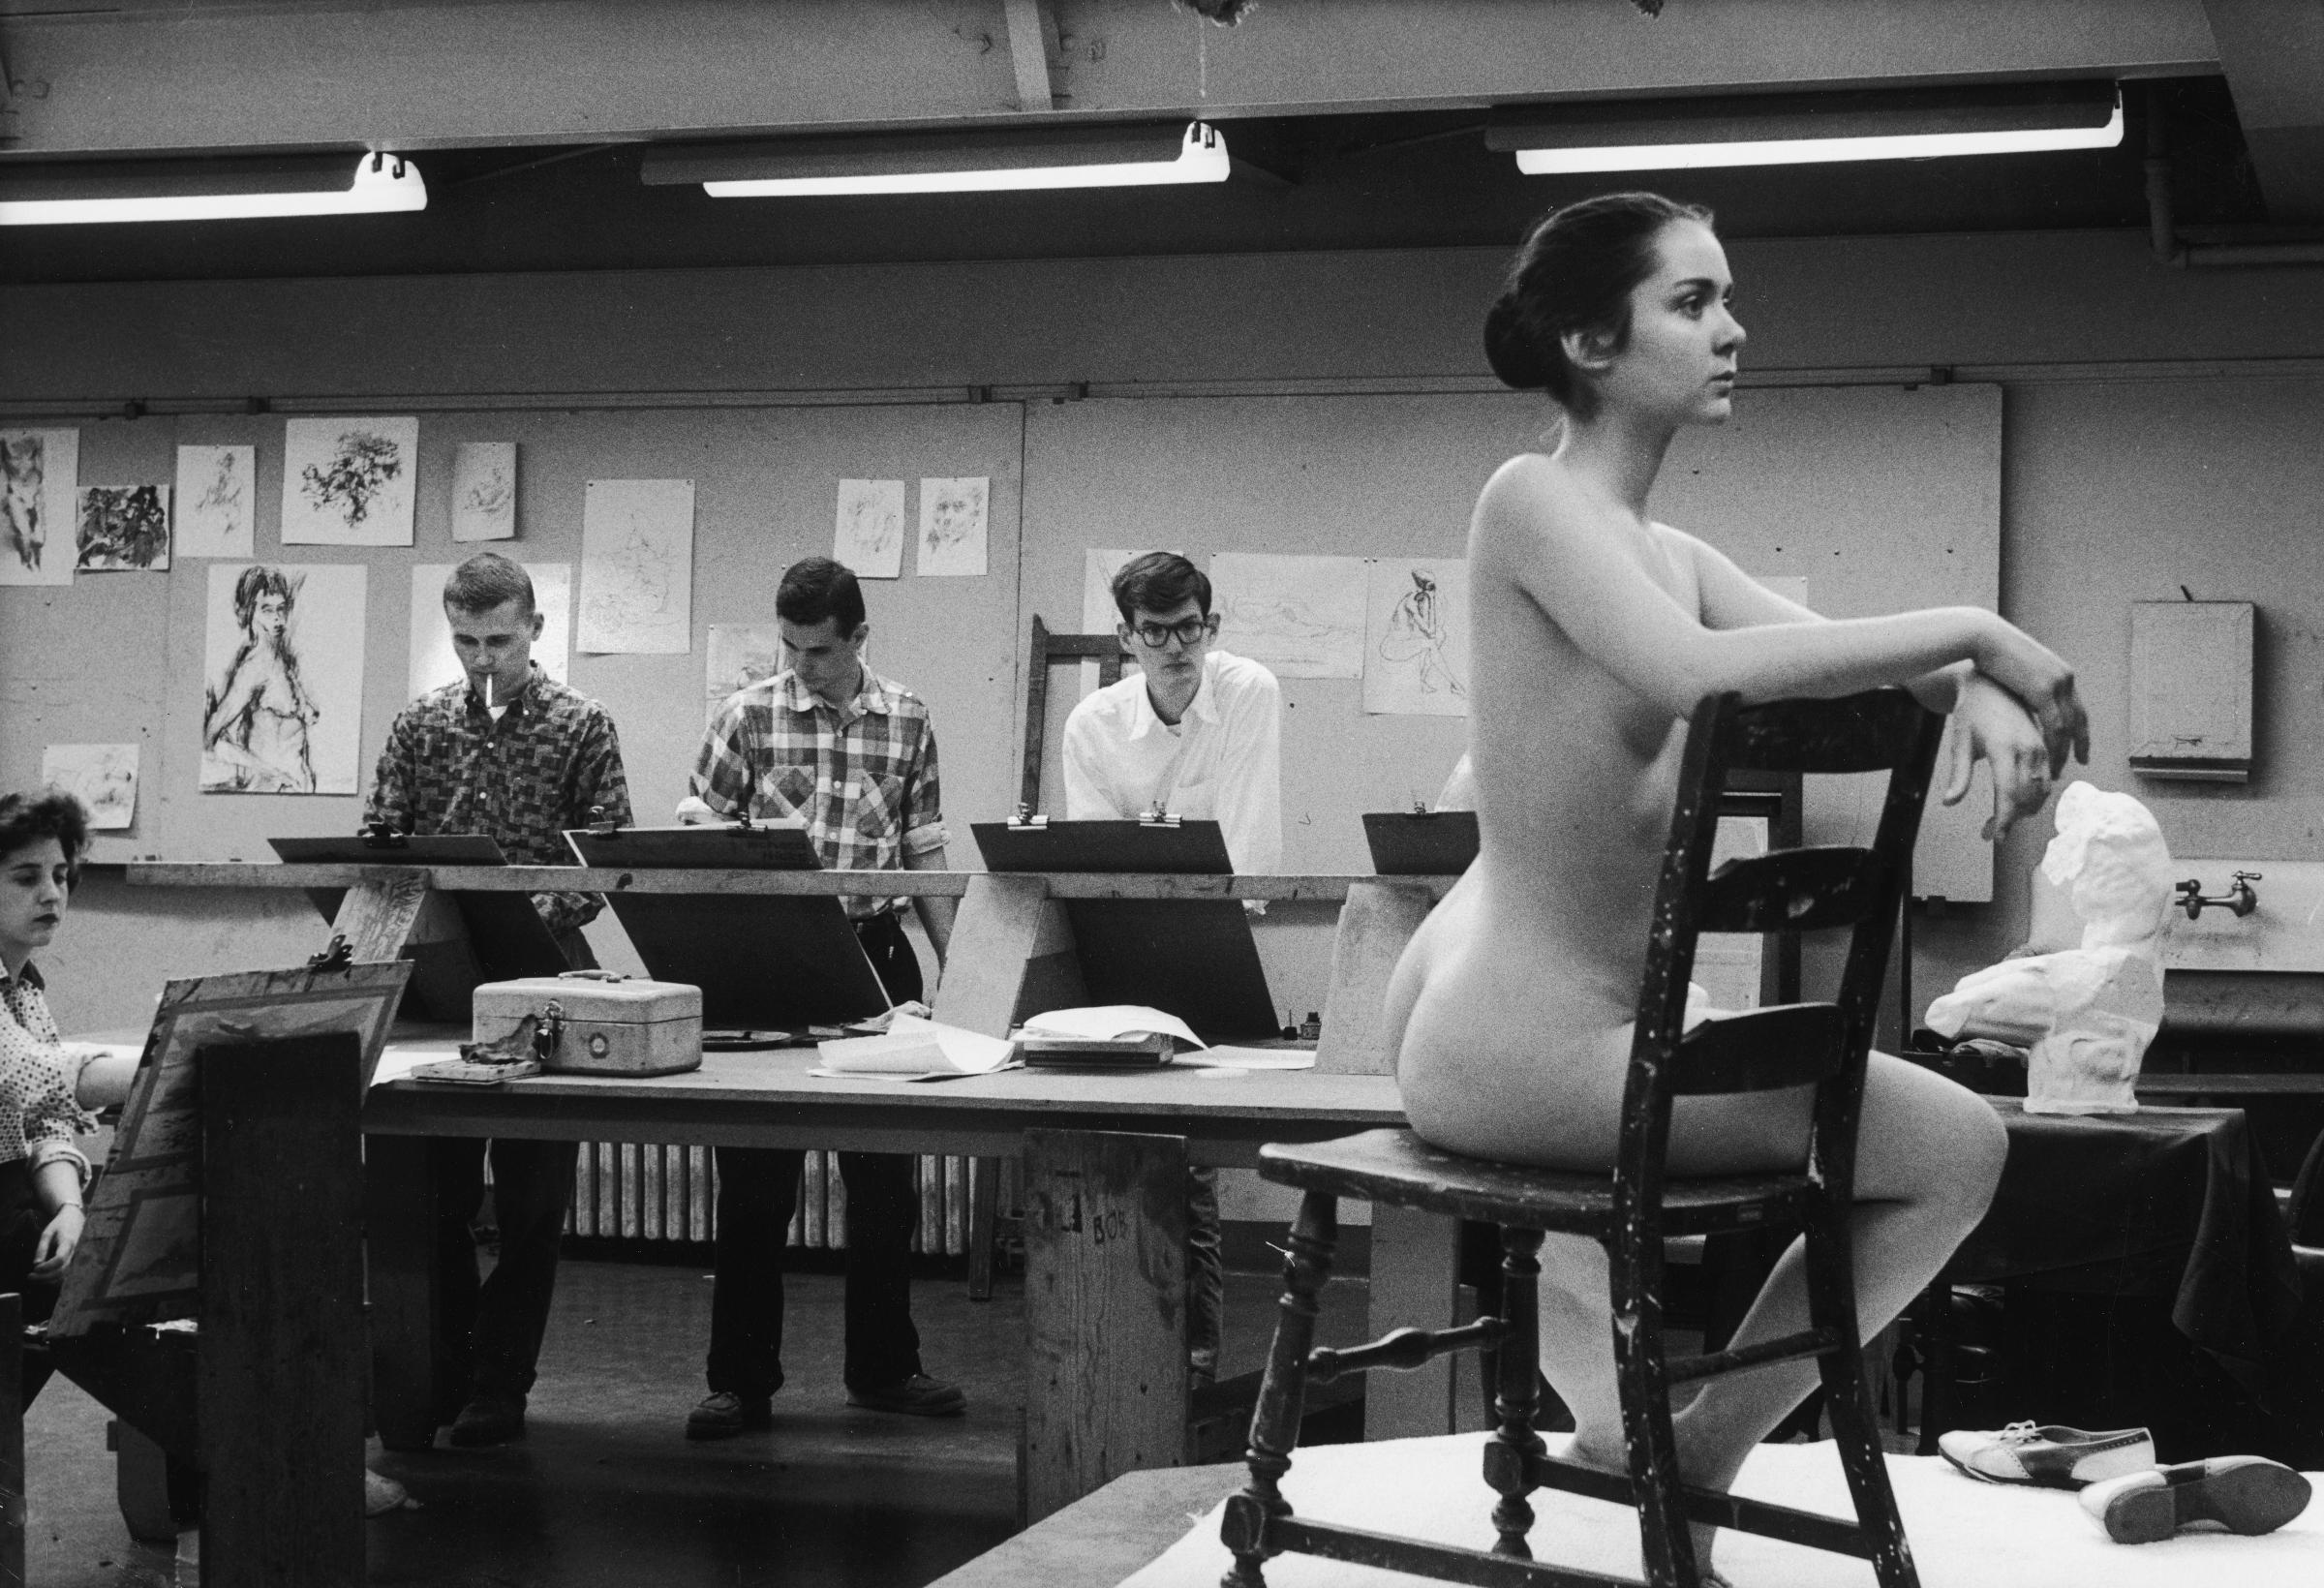 Students at the University of Iowa draw from a nude model in 1961.